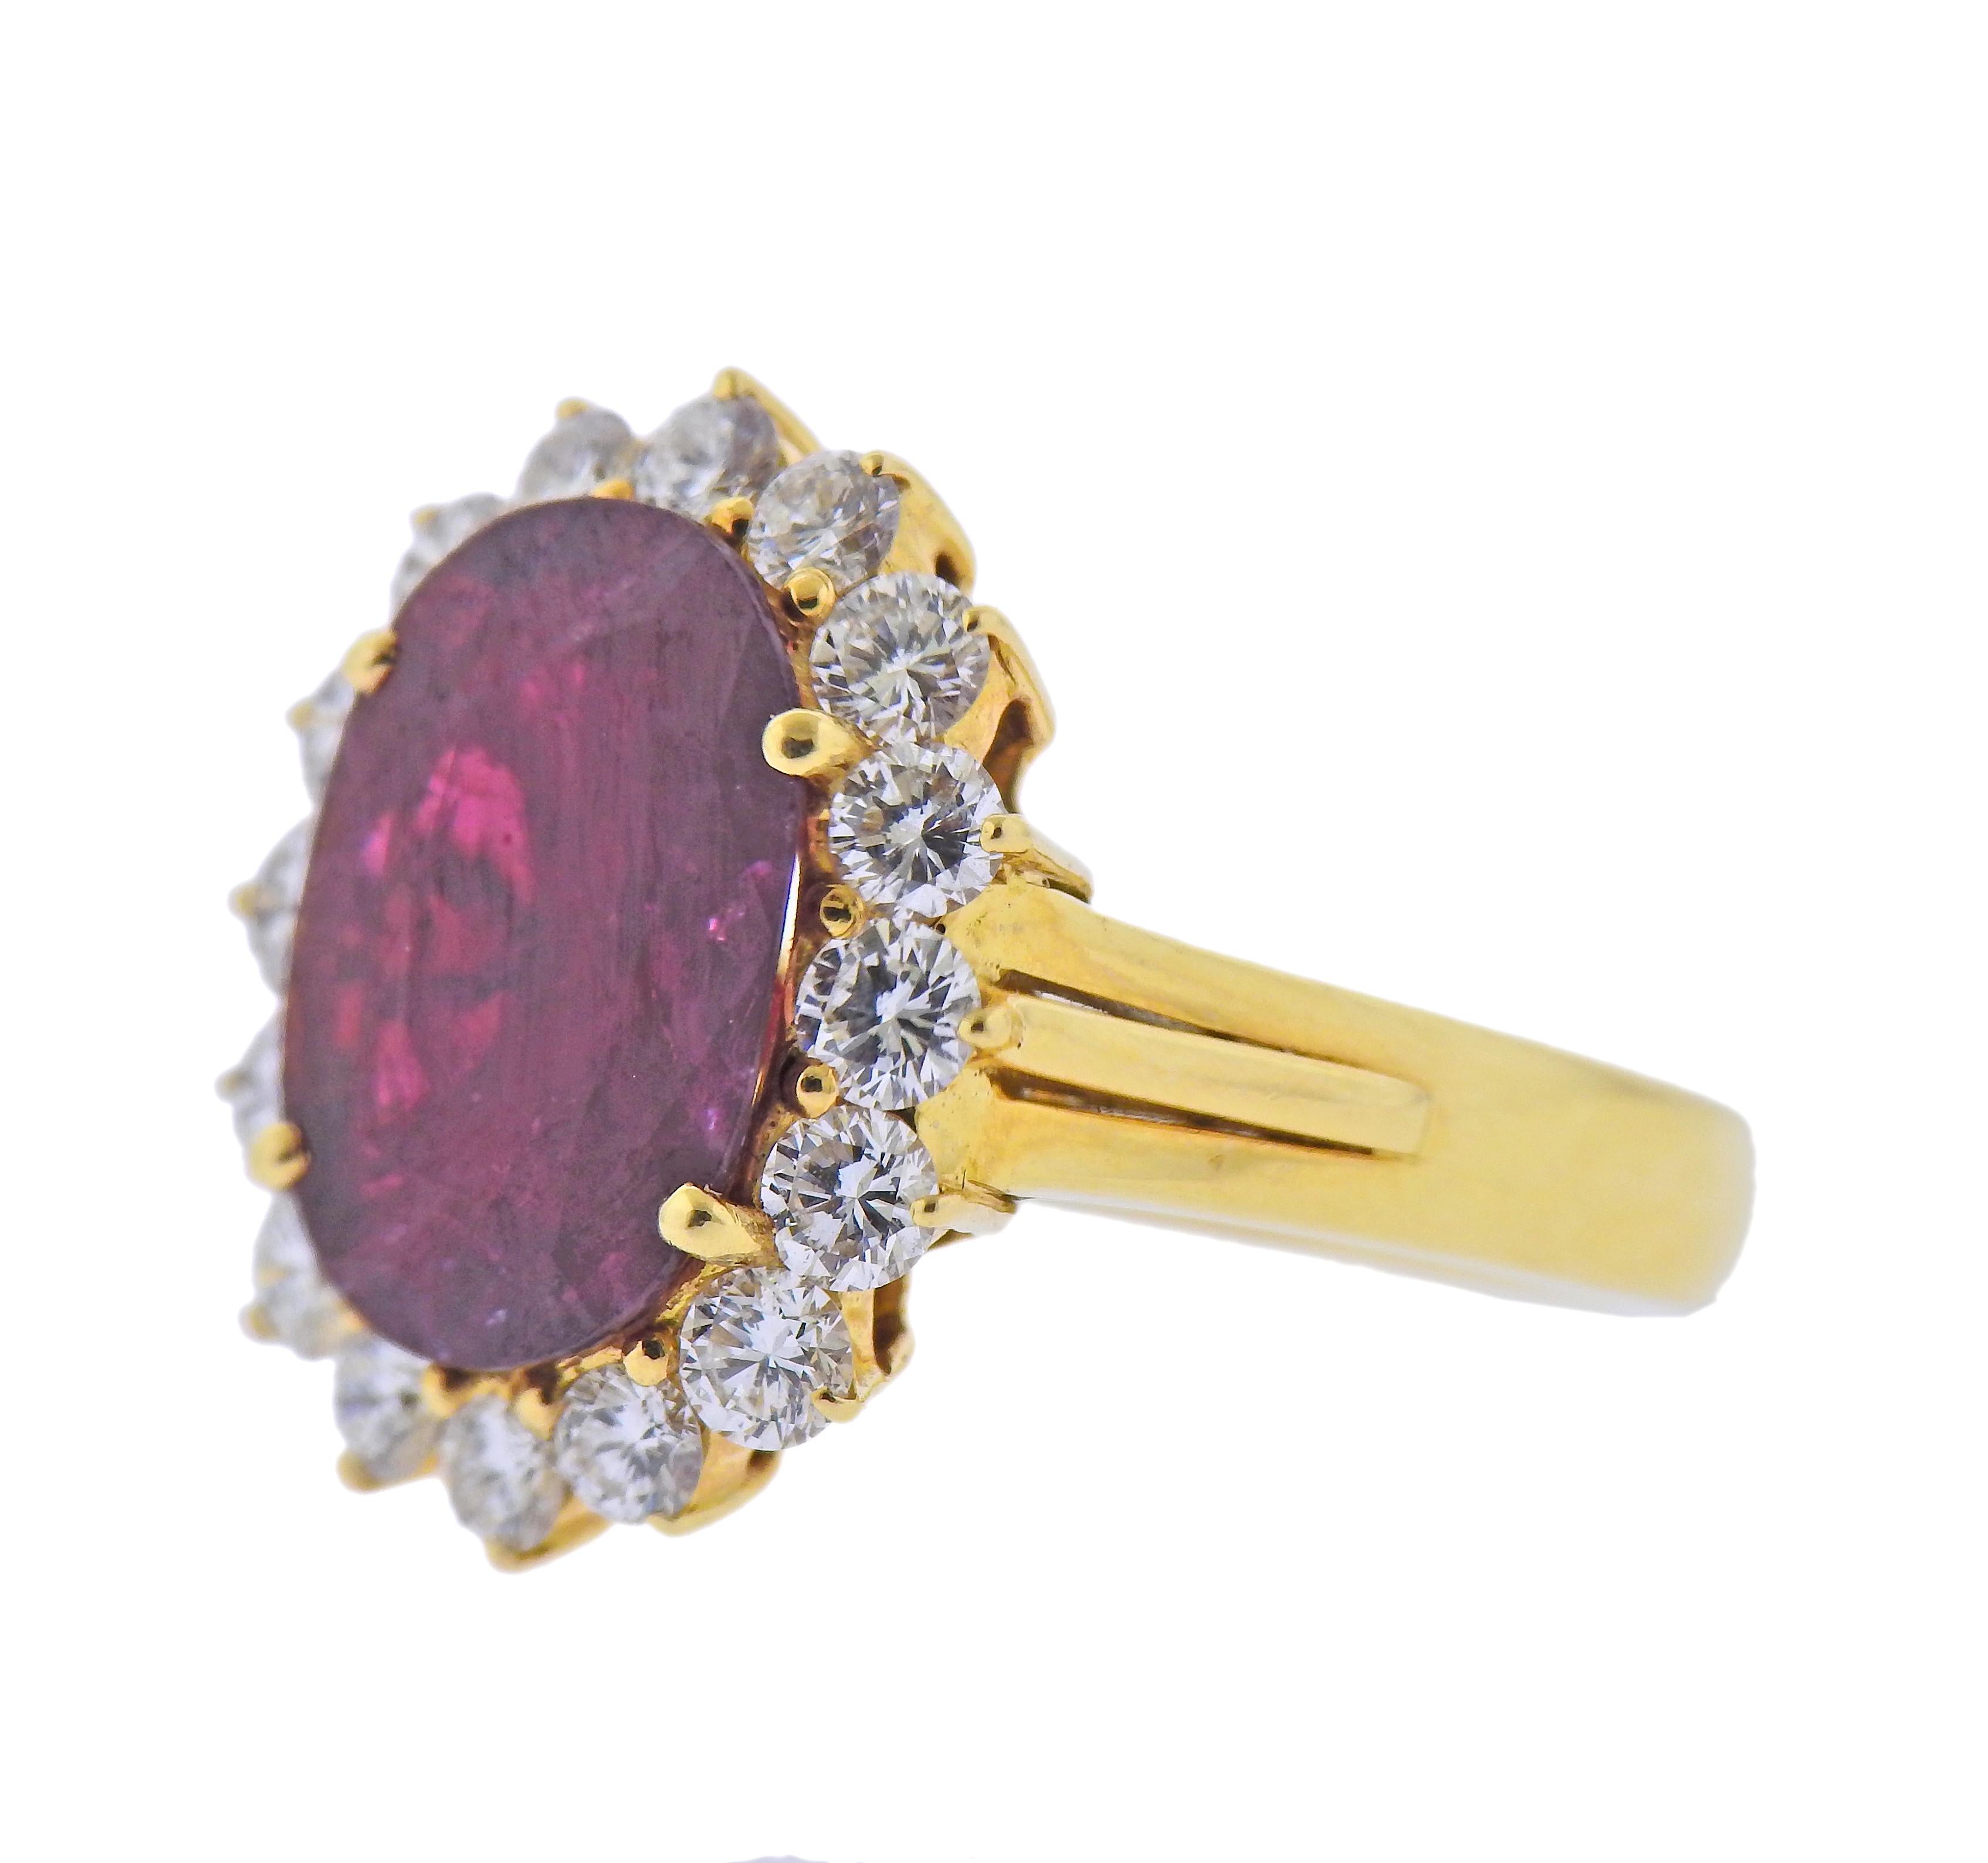 18k gold cocktail ring with an oval 13.7 x 9.5mm ruby, surrounded with approx. 1.30ctw in diamonds. Ring size - 7, ring top - 19mm x 15mm. Marked: K18. Weight - 9.1 grams.